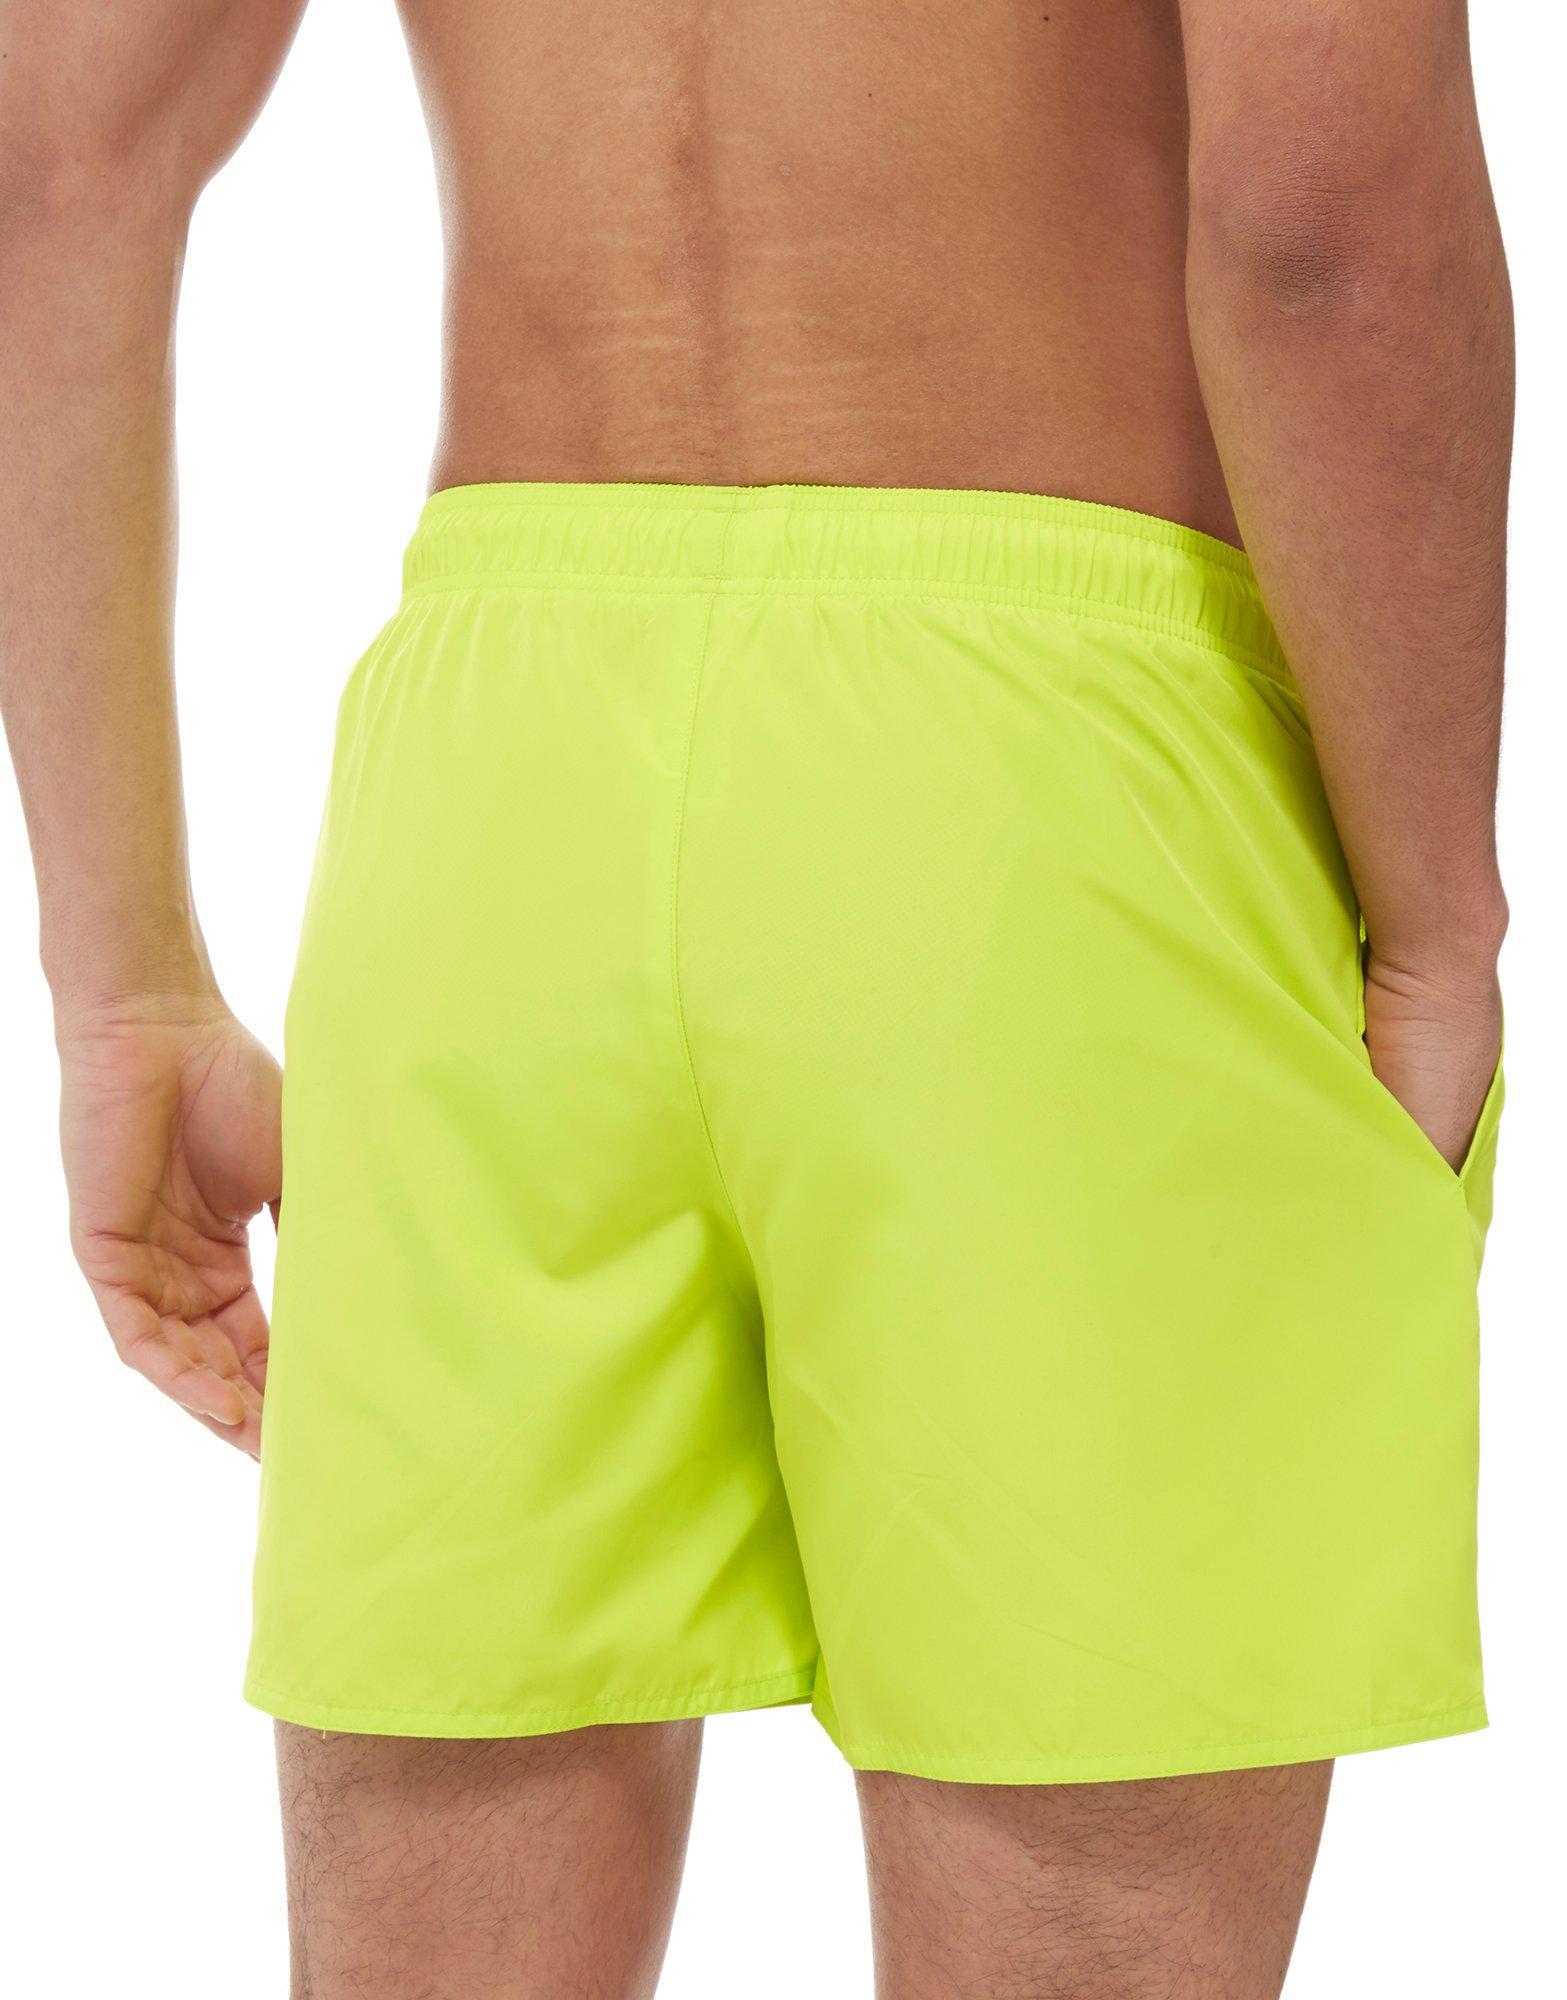 Lyst - Adidas Solid Swim Shorts in Yellow for Men